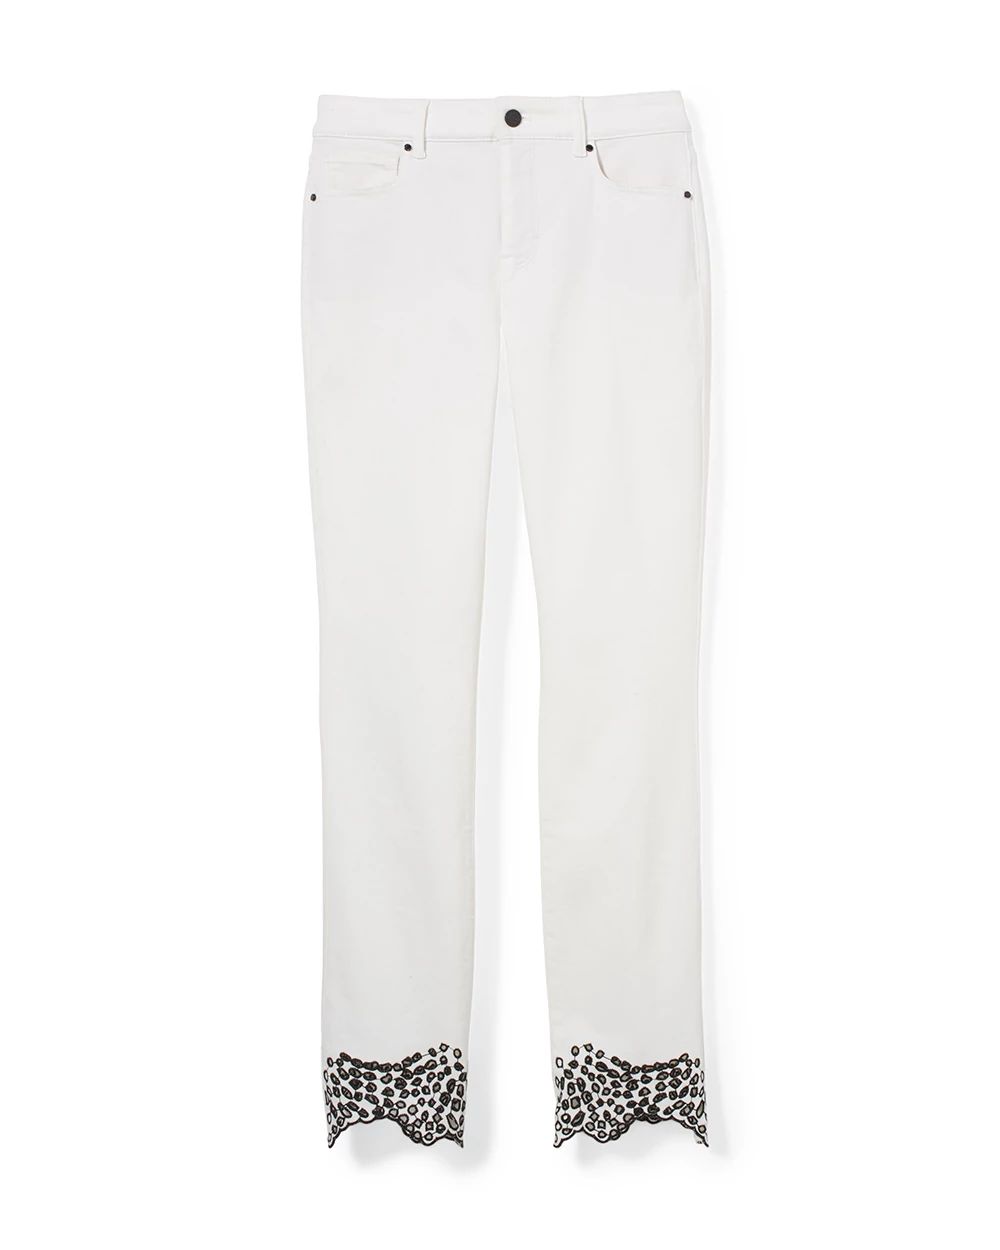 High-Rise Cutout Hem Boot Cut Cropped Jeans click to view larger image.